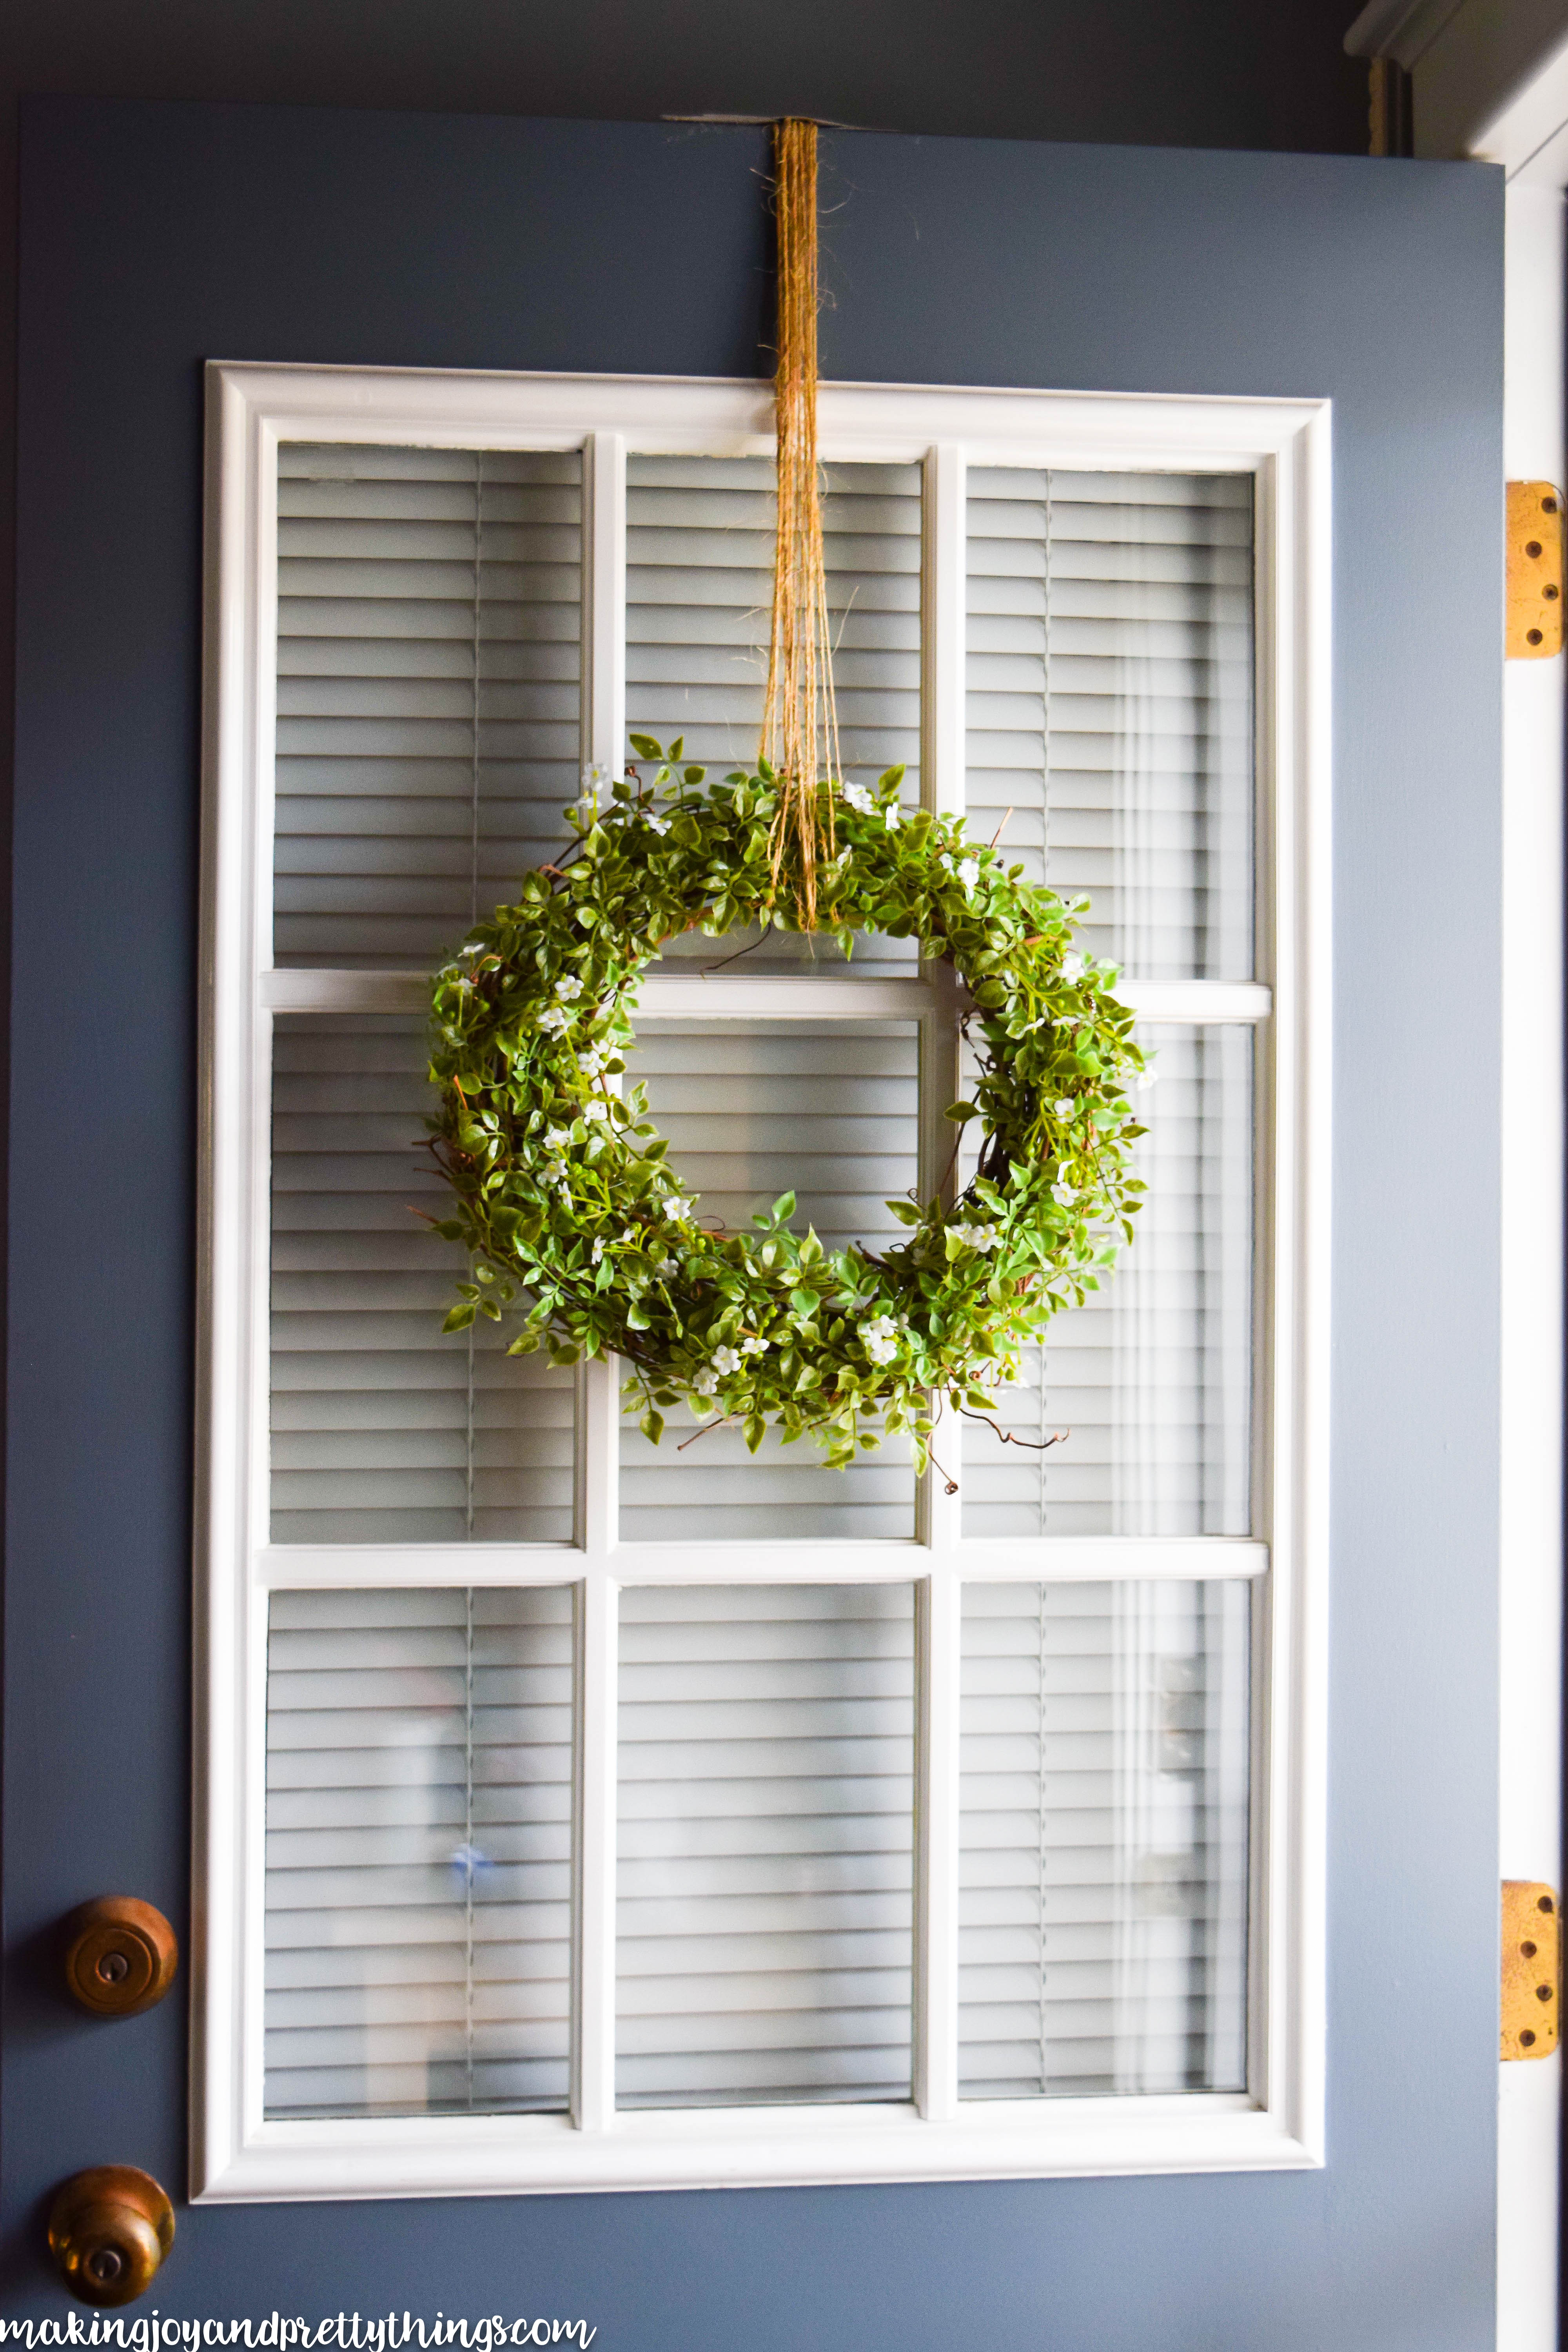 This simple farmhouse wreath is an easy DIY to add fixer upper and farmhouse style to your home. Easy to make and has a beautifully simple finish. Bring the farmhouse style home decor into your home